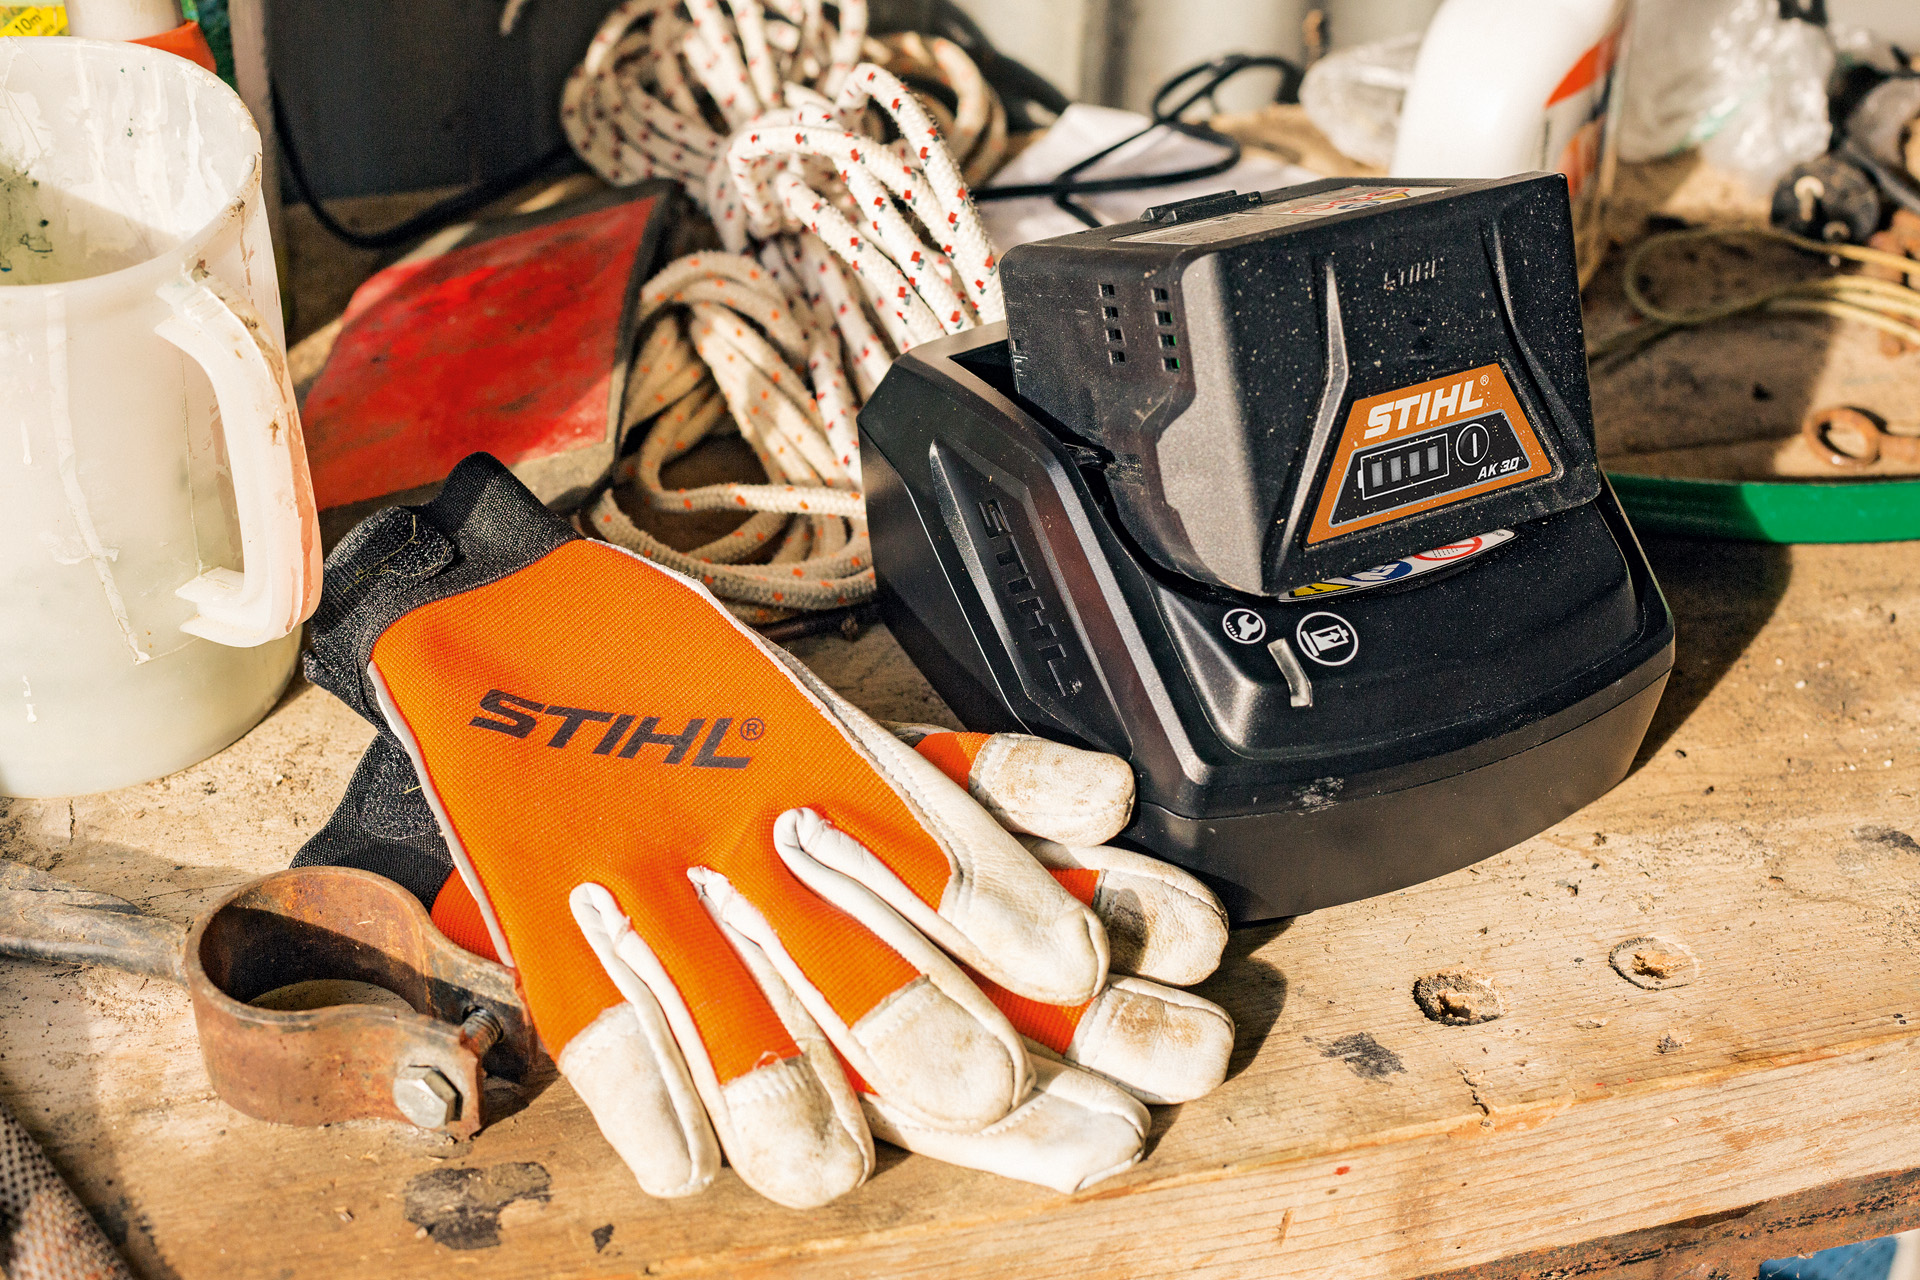 AK-Series lithium-ion batteries charging alongside STIHL gloves and tools